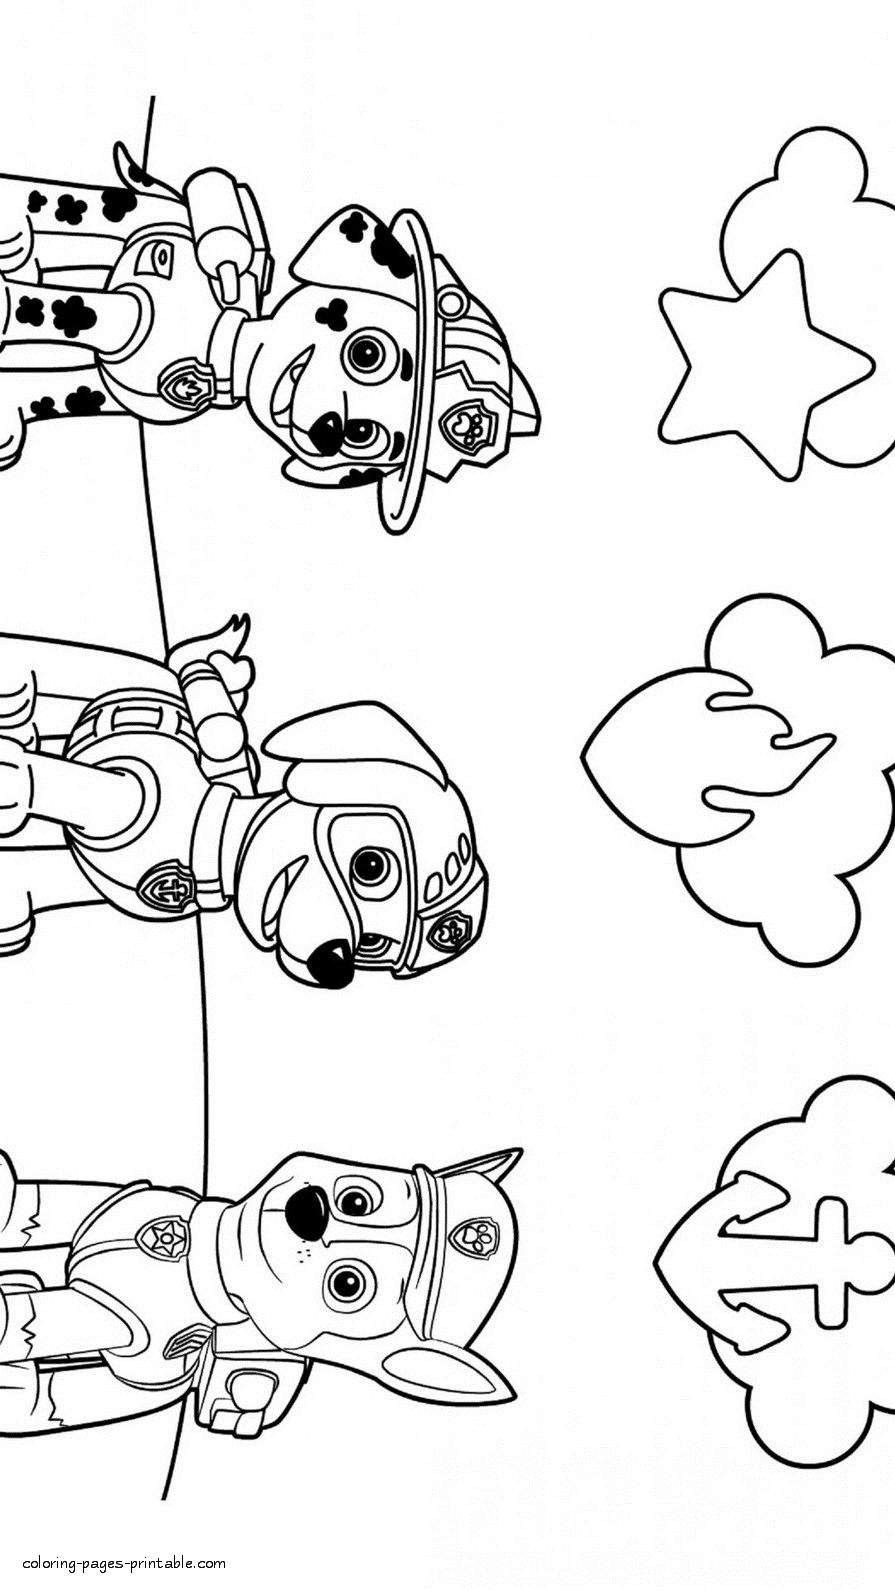 Paw Patrol coloring pages that you can print